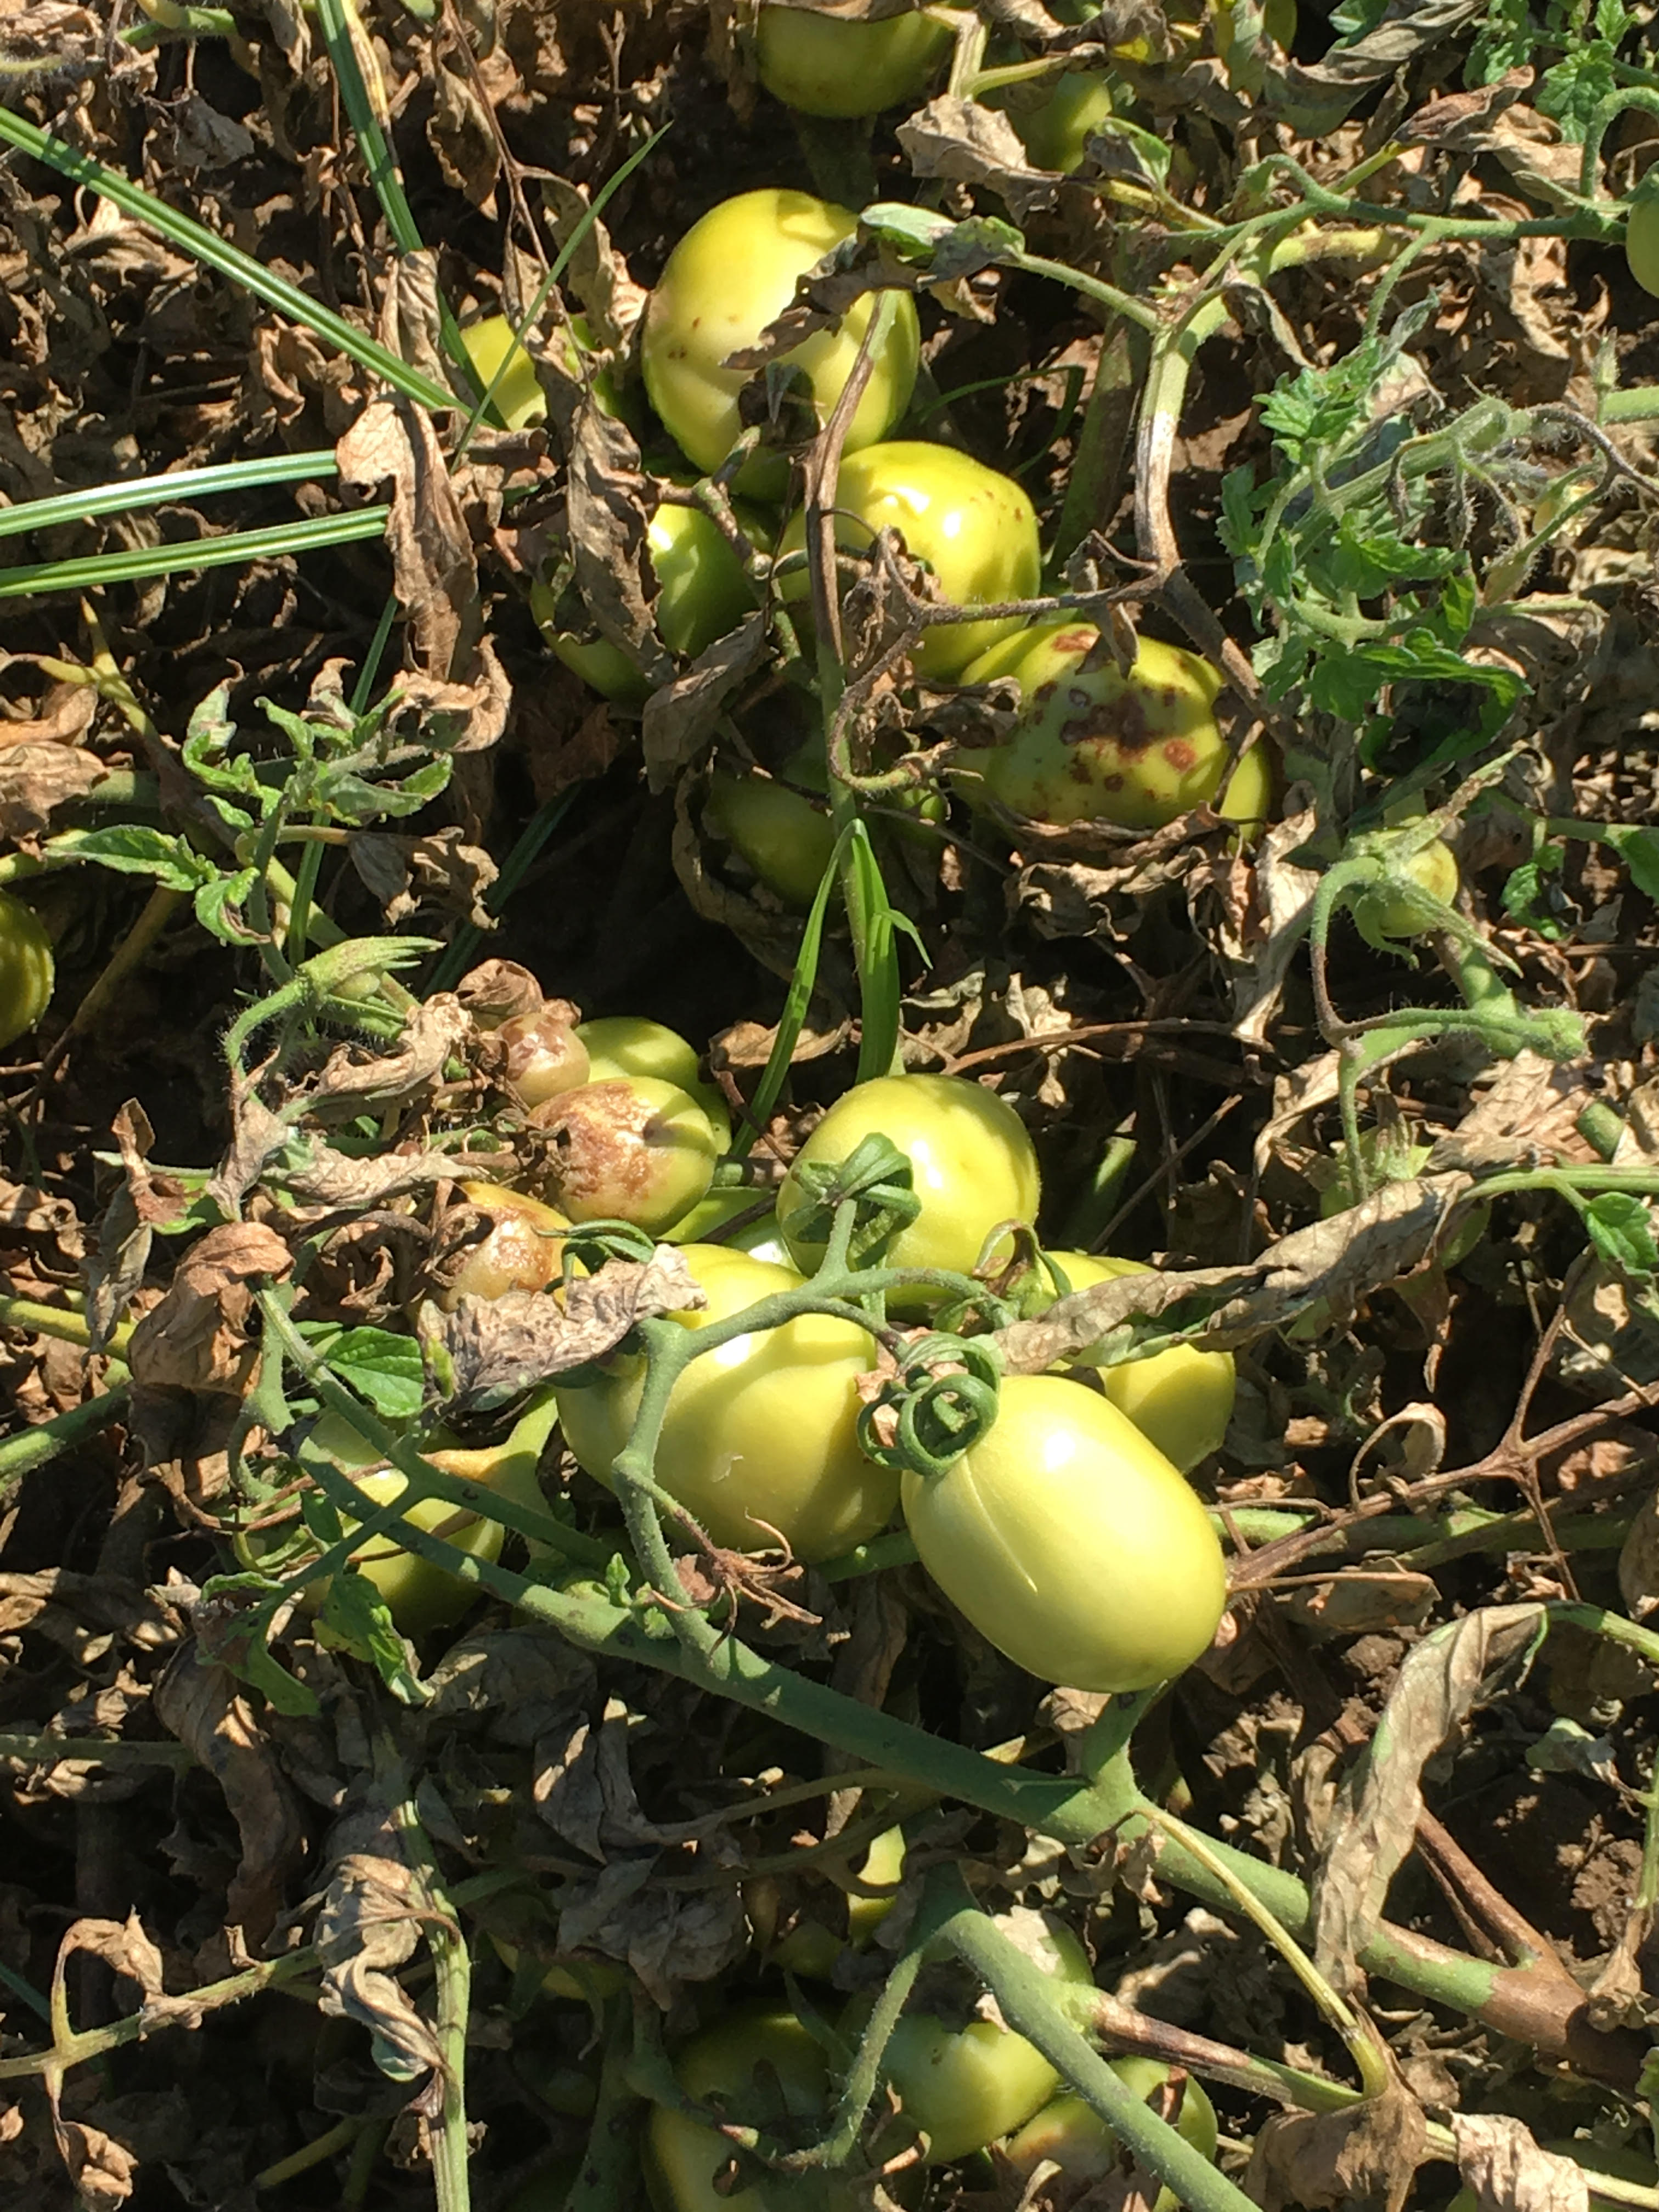 tomatoes with bacterial speck and late blight